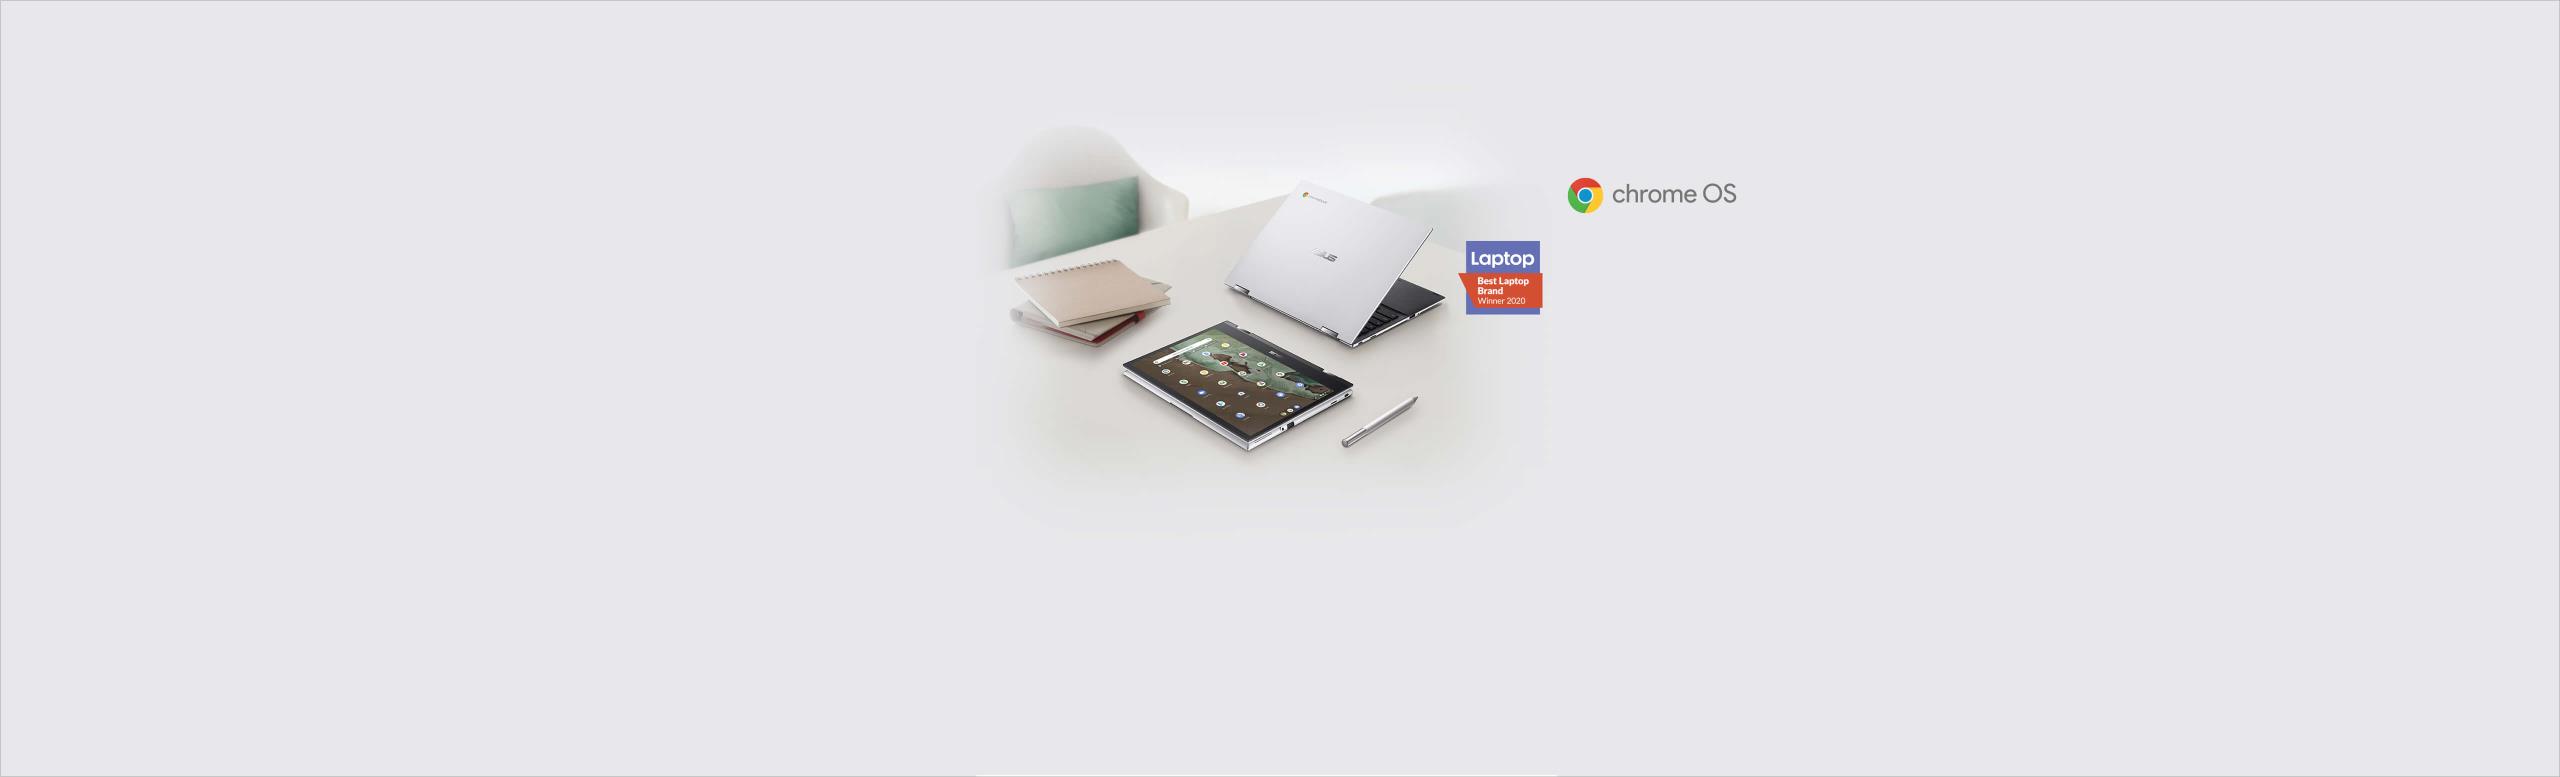 Two ASUS Chromebook Flip CM3 are shown on a white desk with two notebooks beside them. The one at the front is in tablet mode with an ASUS Pen next to it. The other one is in laptop mode showing its Silver cover. 2020 Best Laptop badge is on the right side of the device at the back.